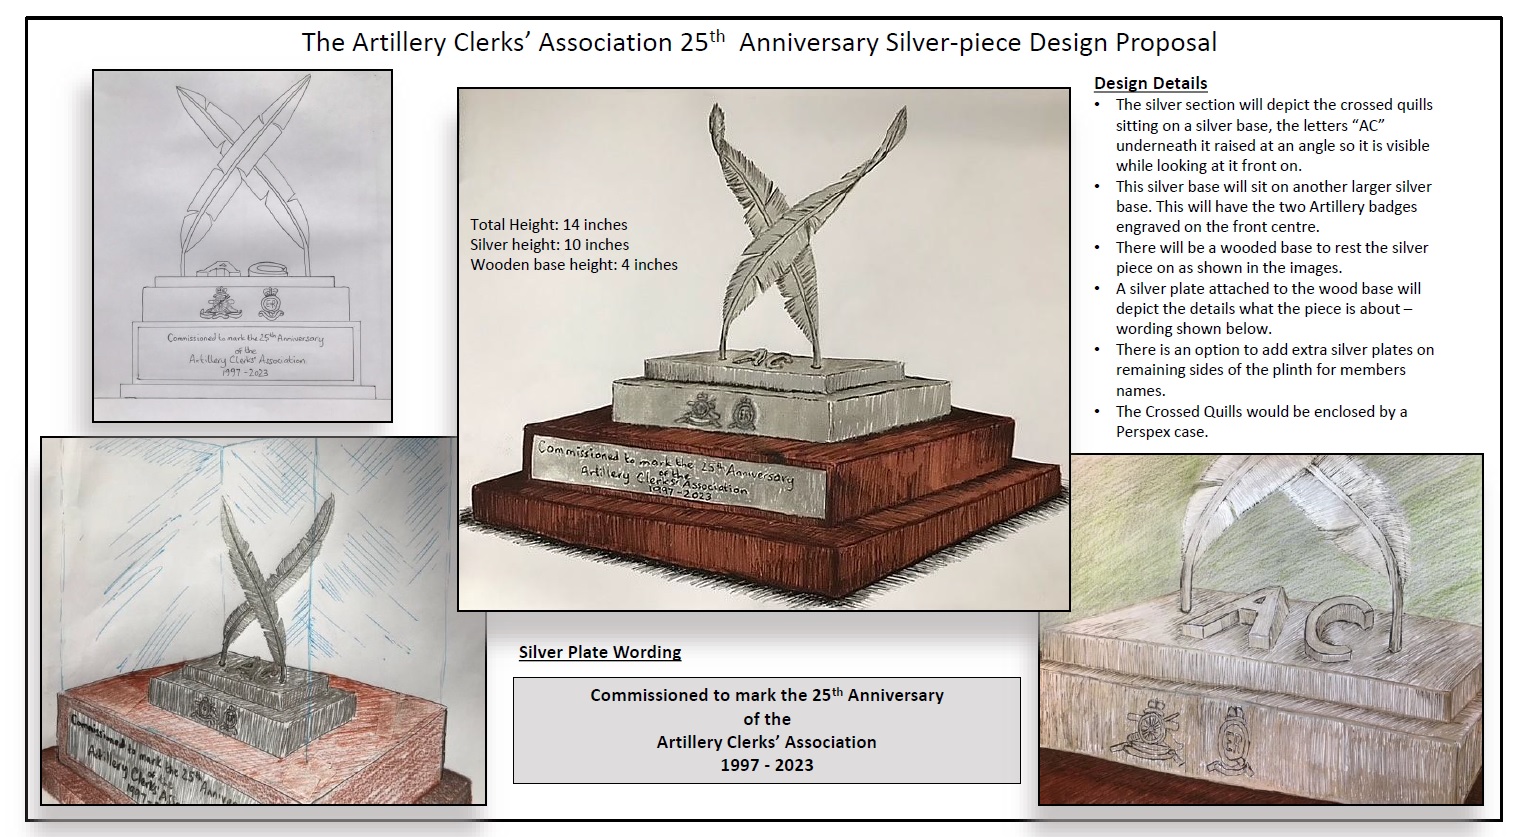 The Association 25th Anniversary Silverware Proposal